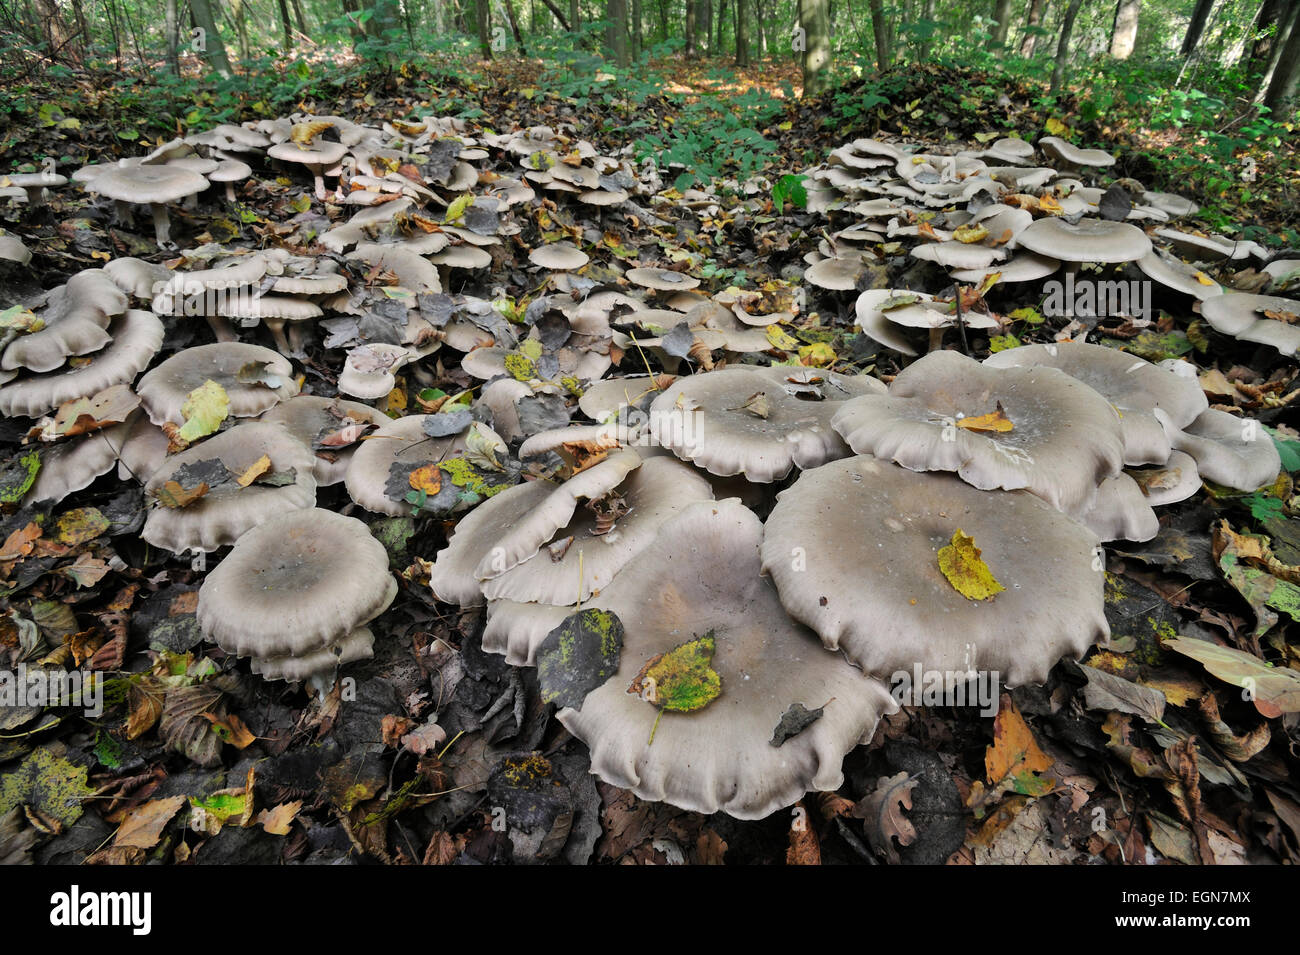 Clouded agaric / Cloud funnel (Clitocybe nebularis / Lepista nebularis) mushrooms forming fairy ring Stock Photo